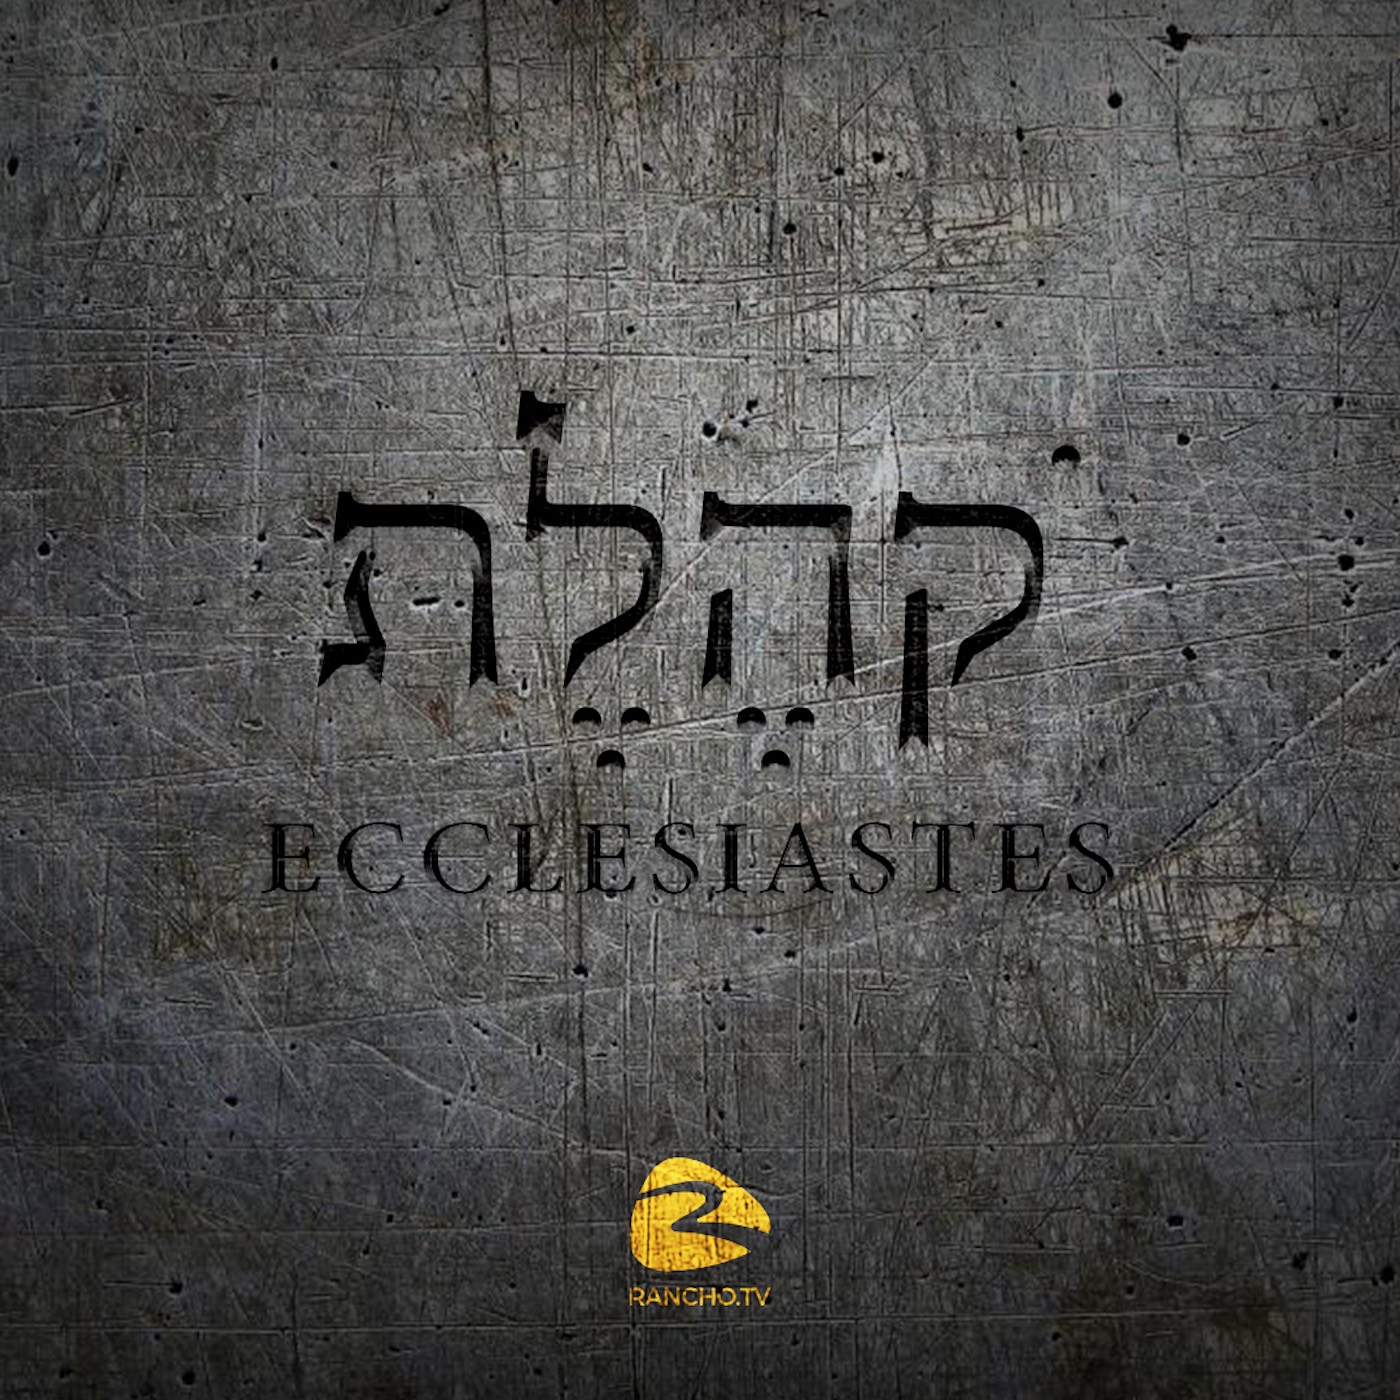 Ecclesiastes: The Search for Meaning - Week 1